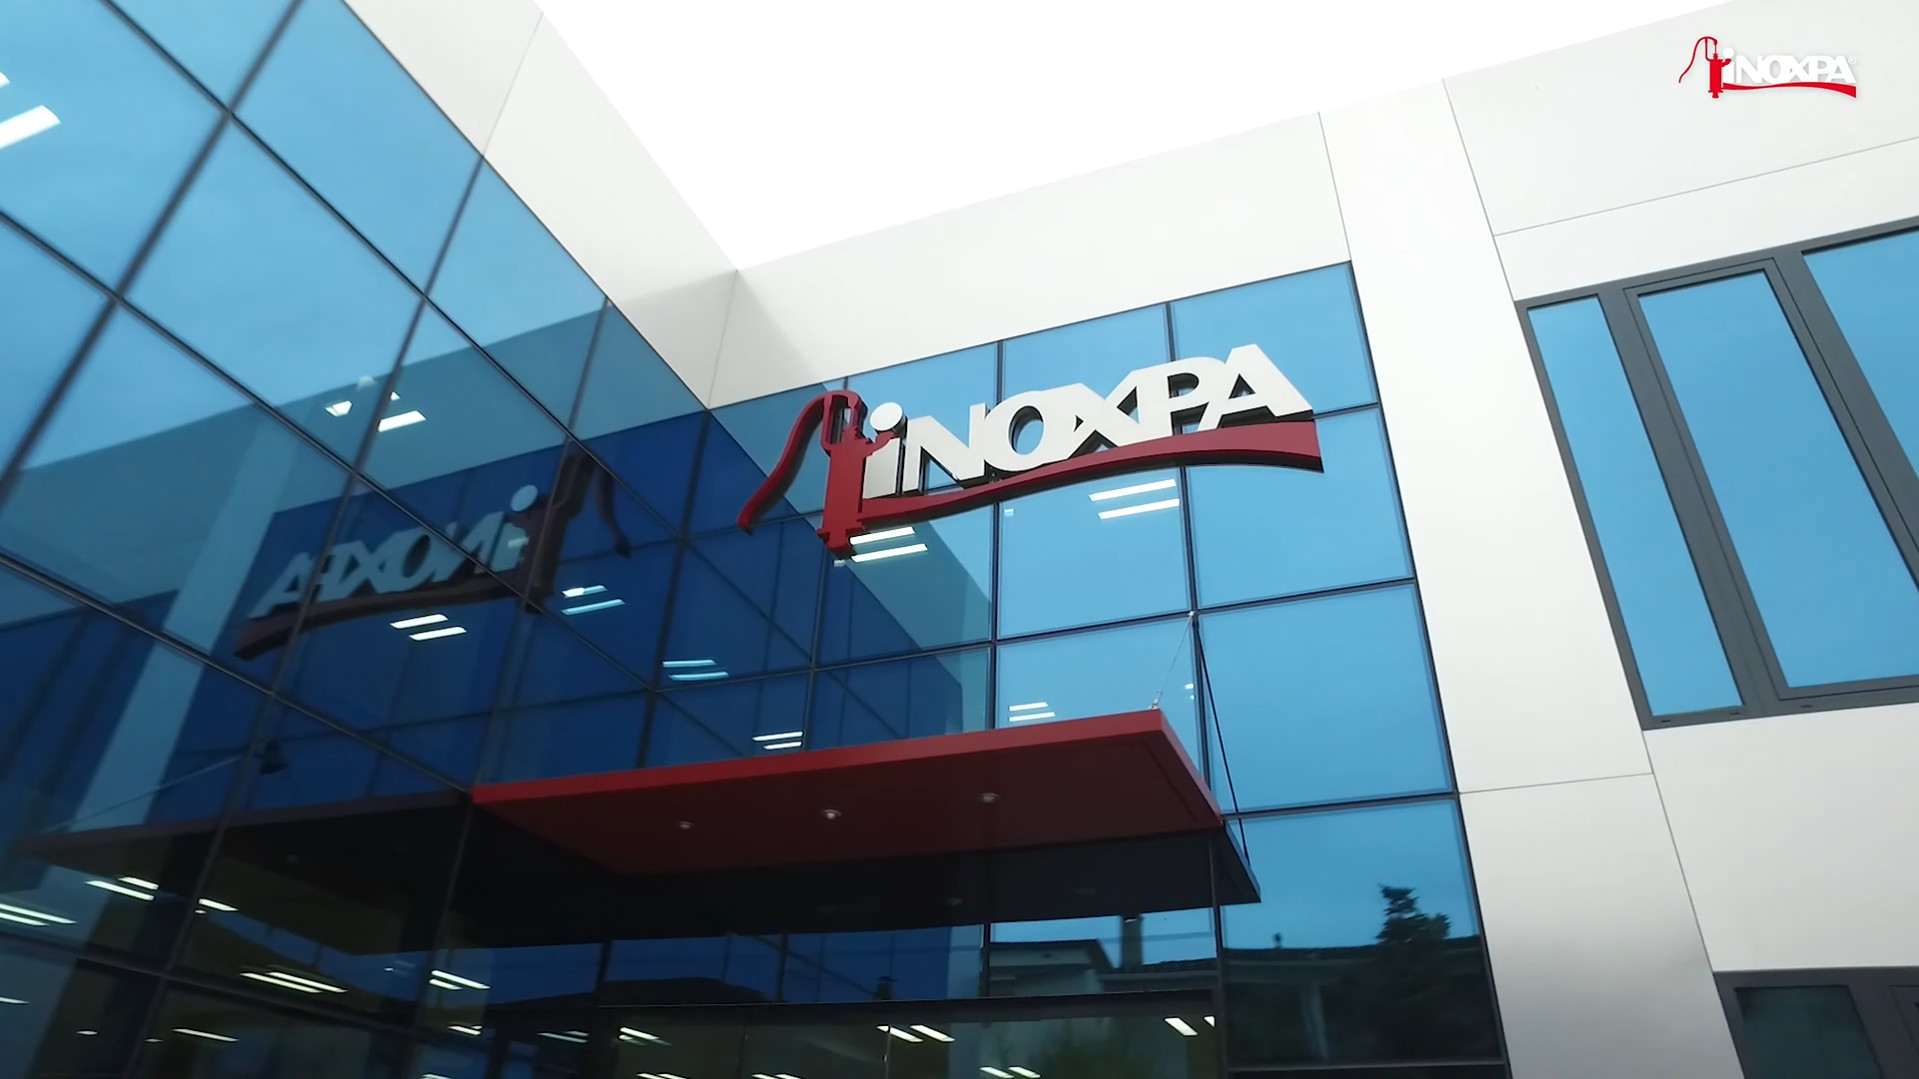 ABOUT INOXPA (SPAIN)